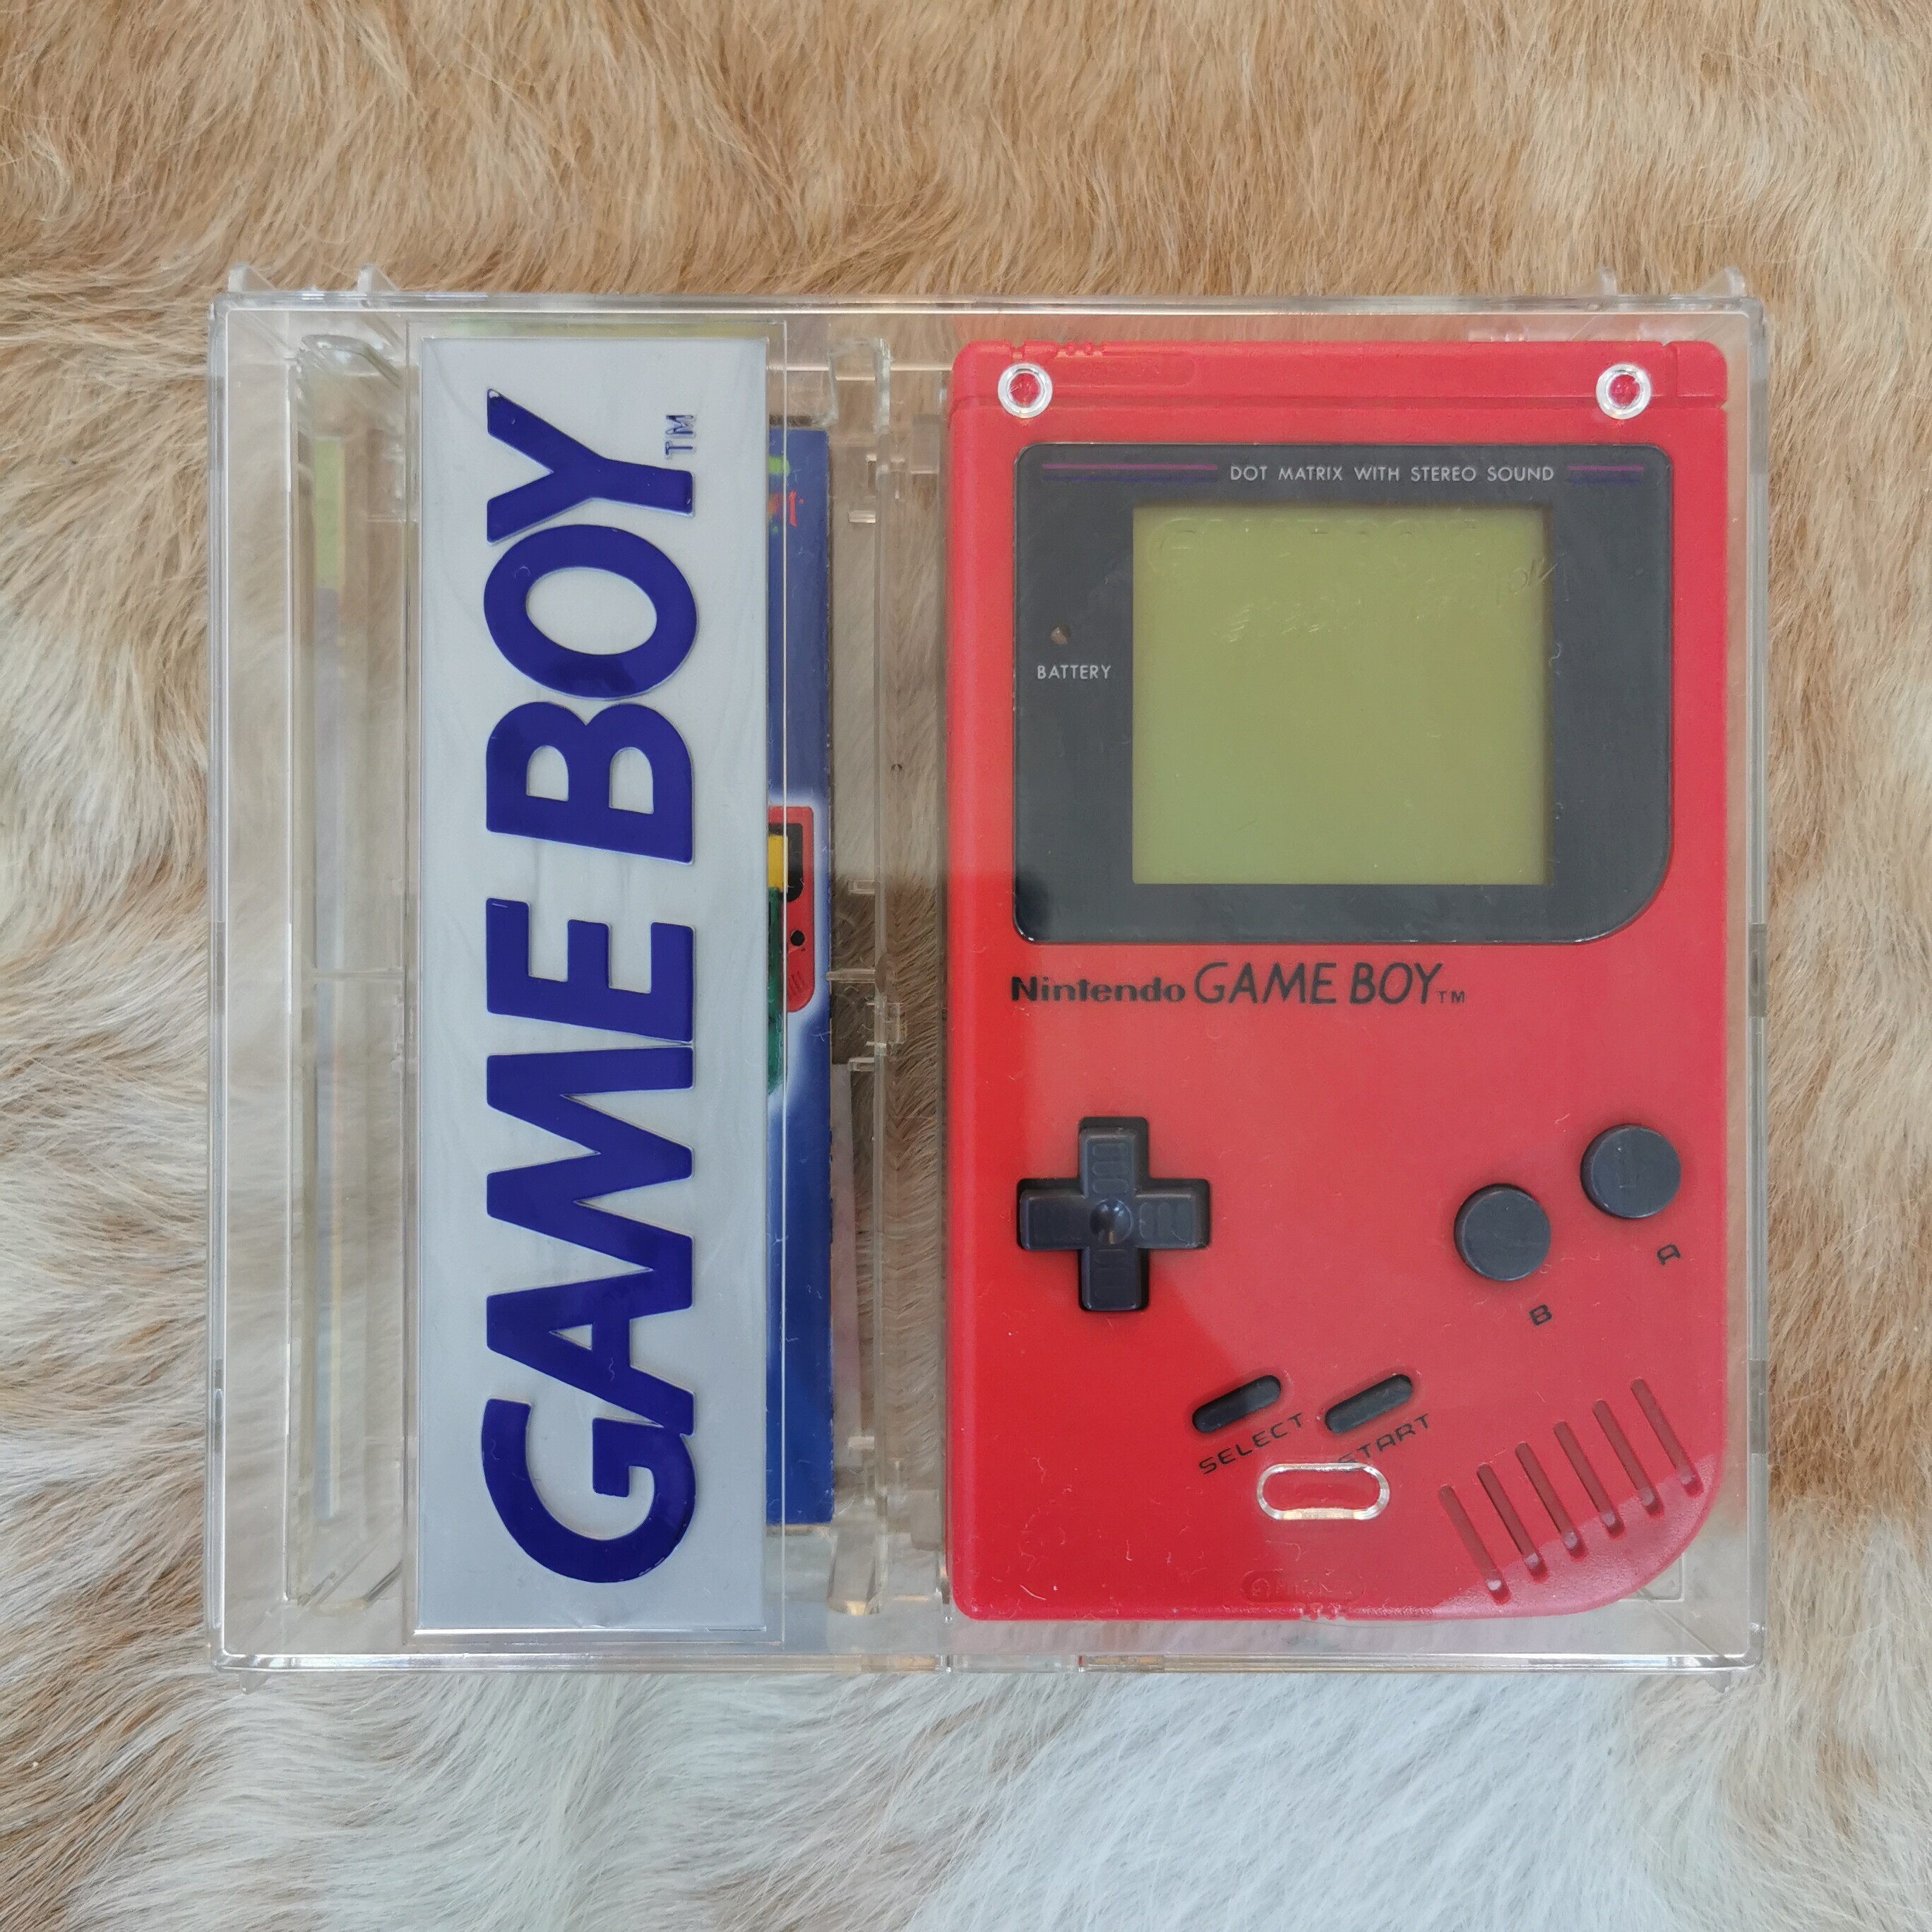  Nintendo Game Boy Crystal Case Red Console [NOE]